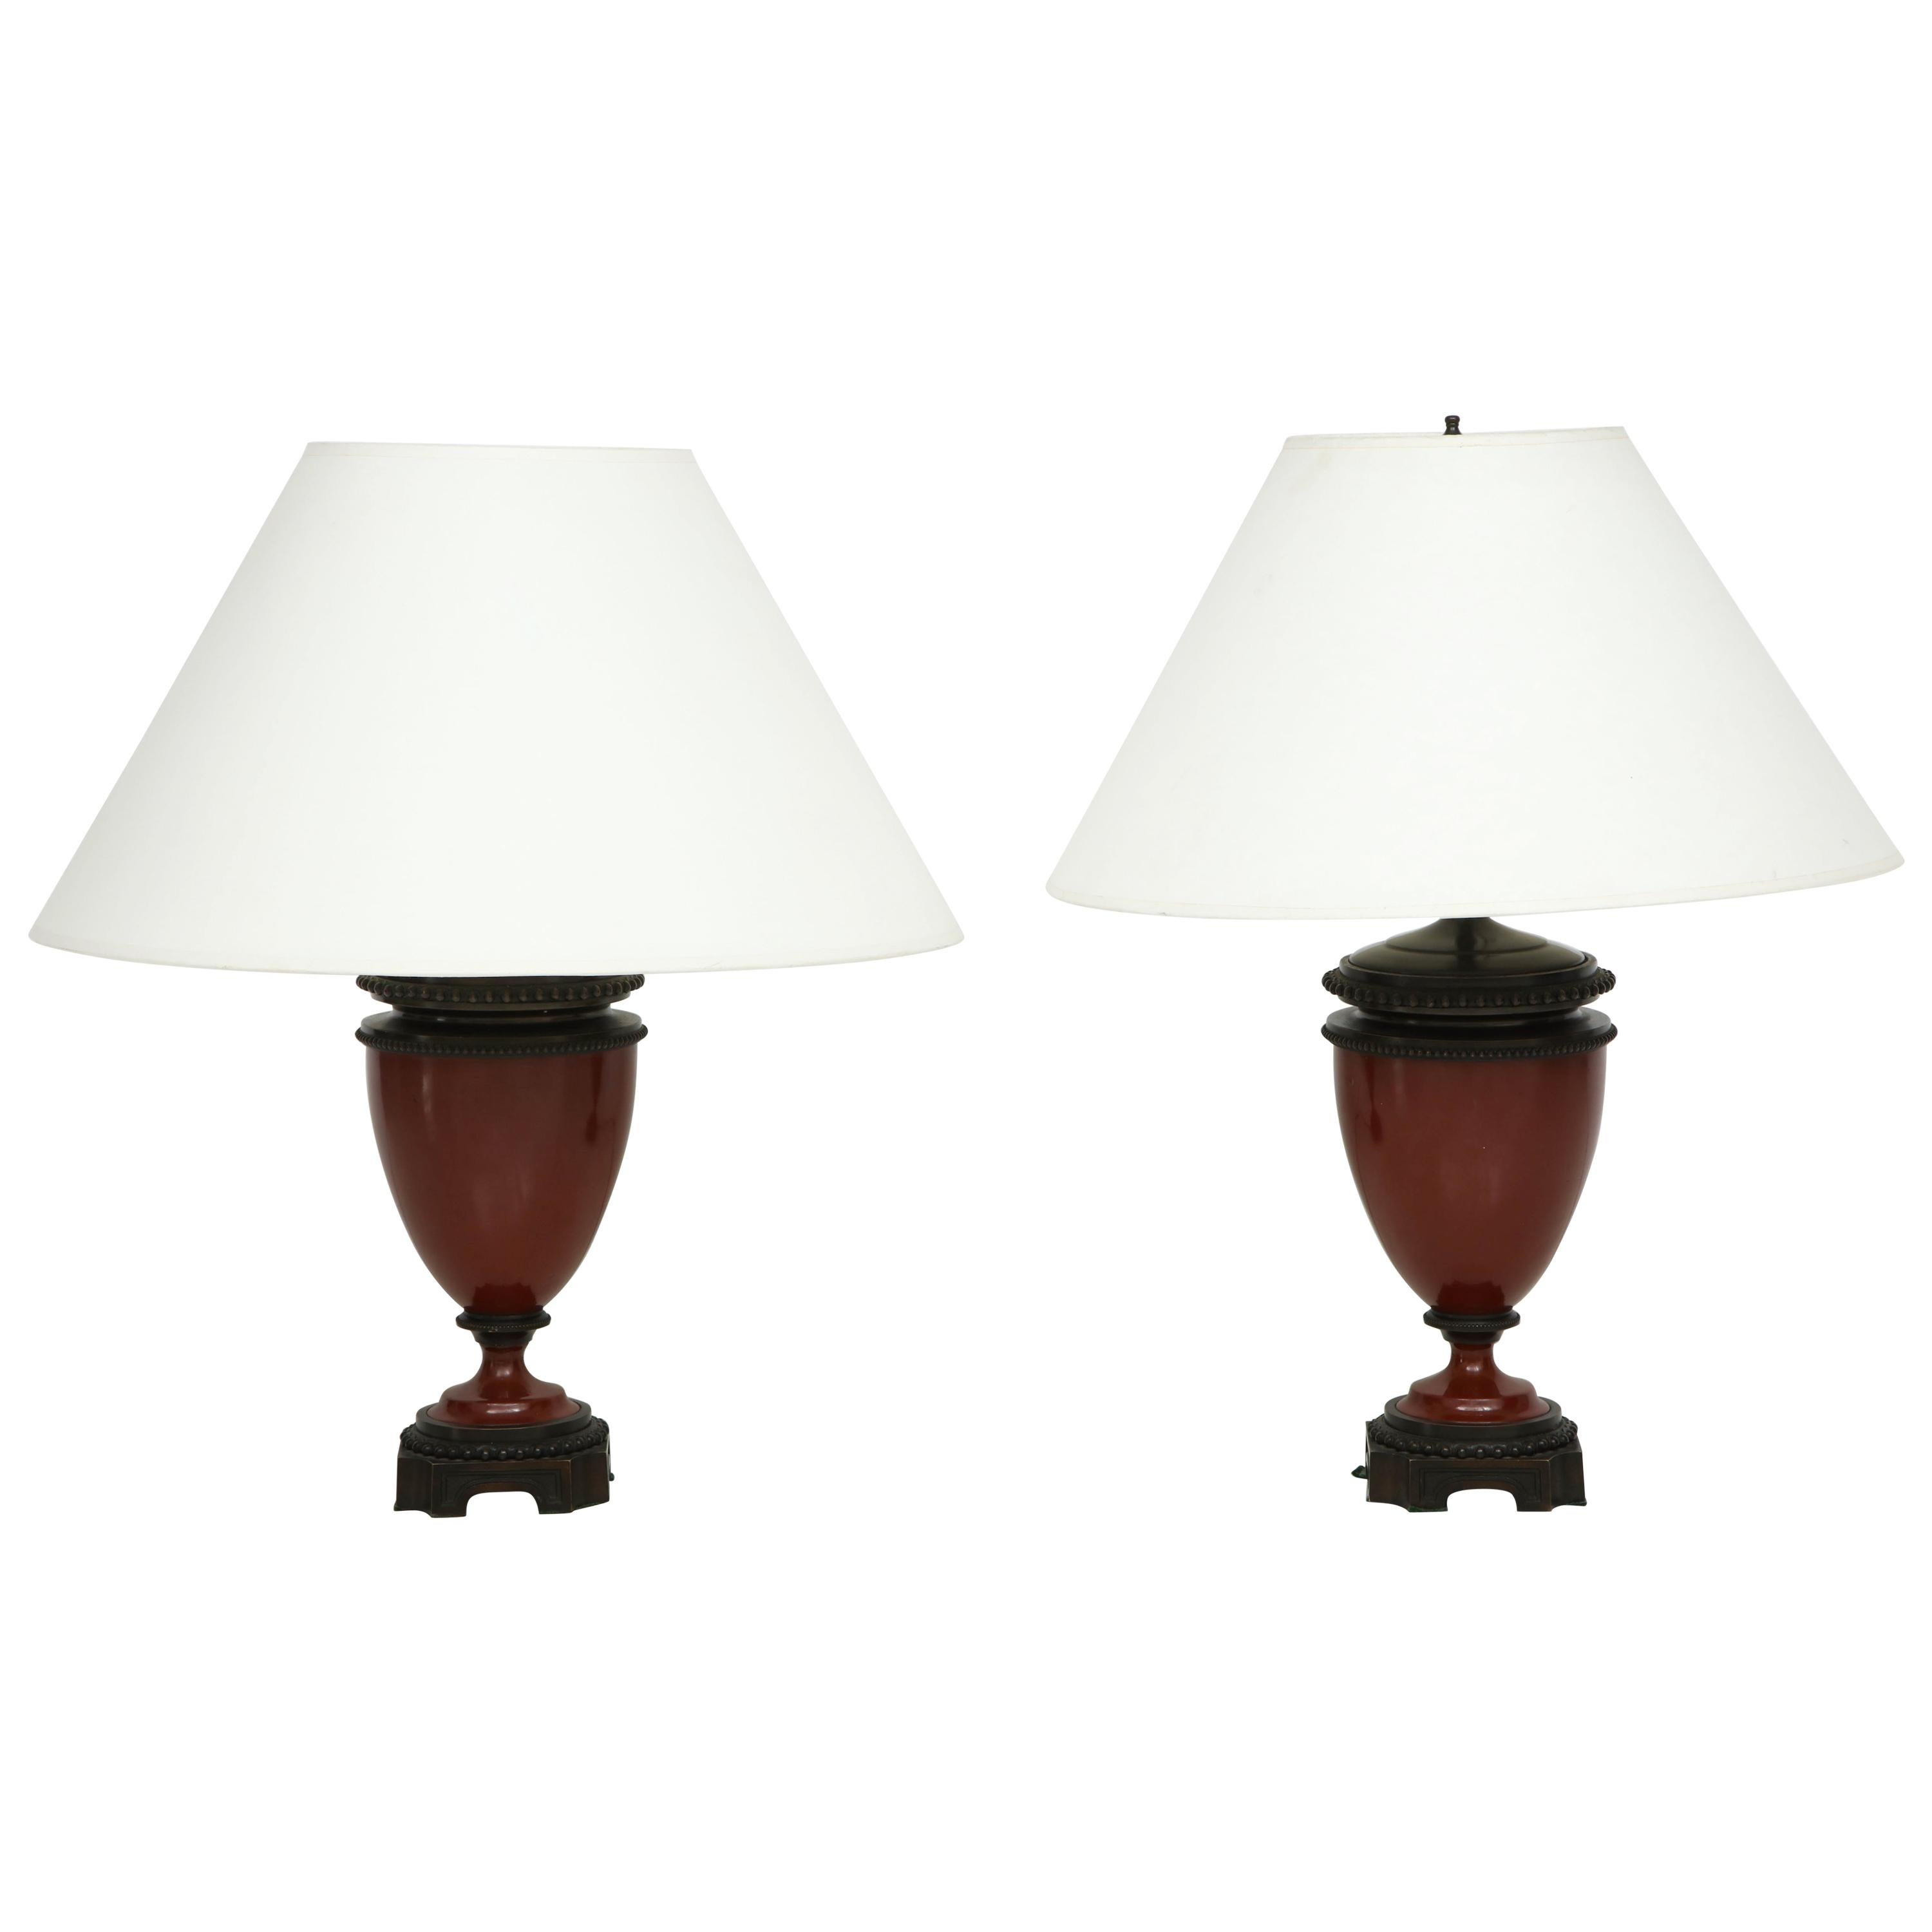 Pair of Mid-19th Century Red Porcelain and Patinated Bronze Vase Shaped Lamps For Sale